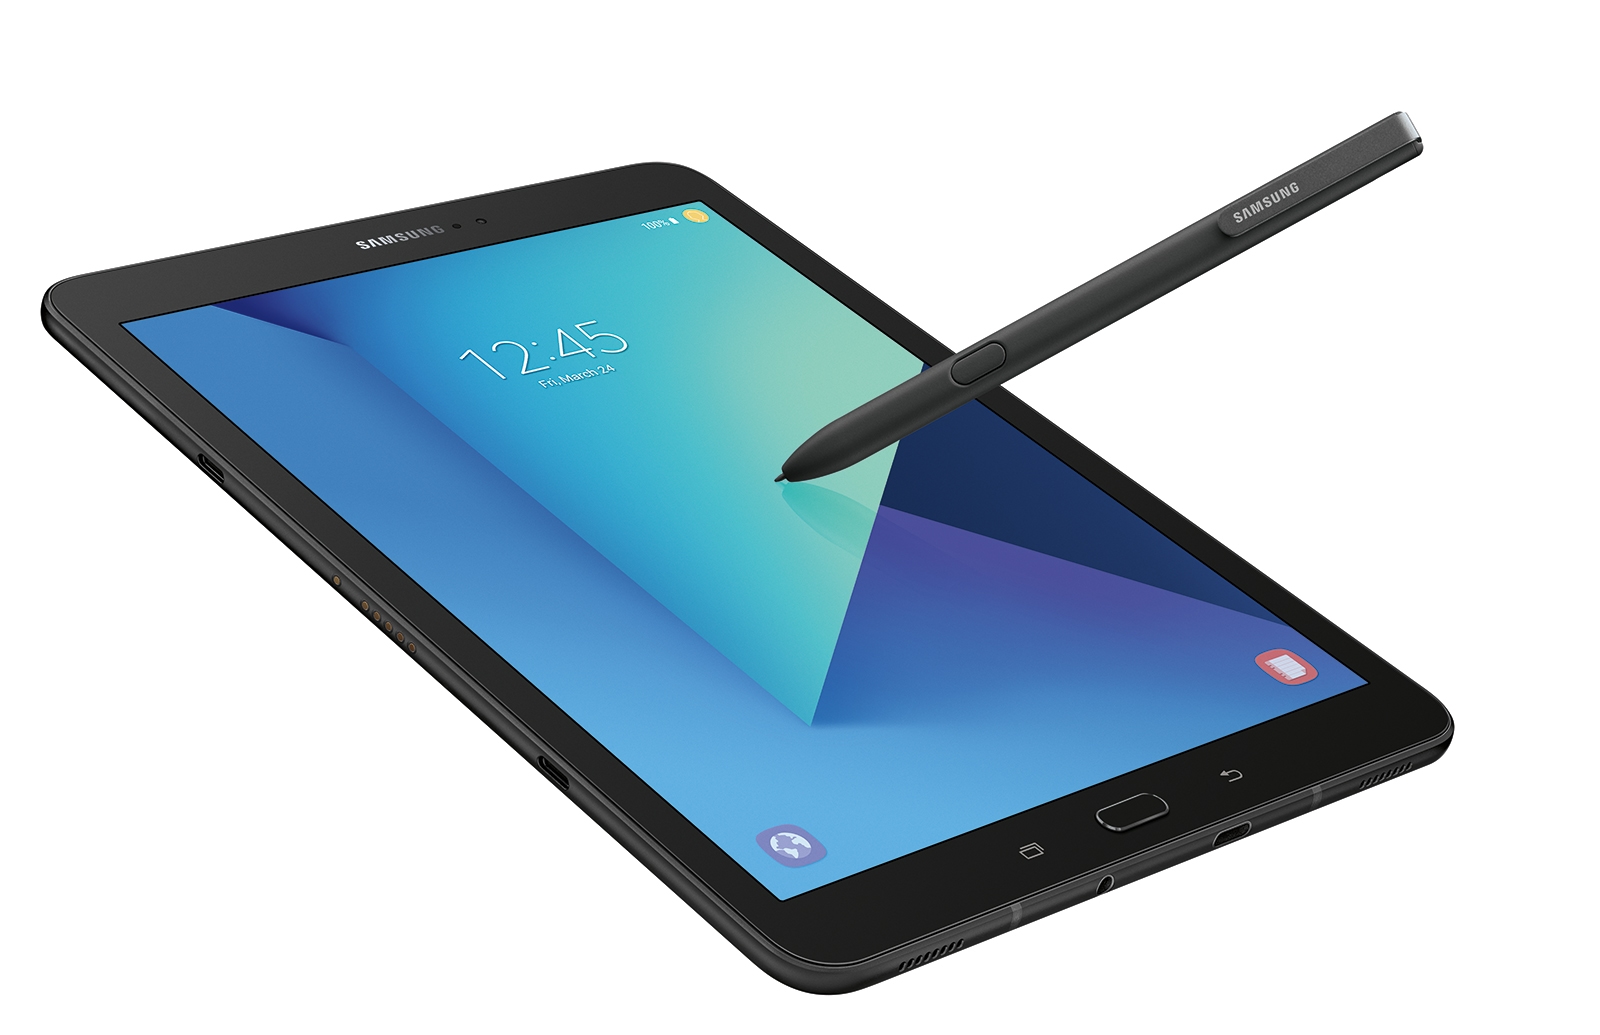 Thumbnail image of Galaxy Tab S3 9.7”, 32GB, Black (Wi-Fi) S Pen included